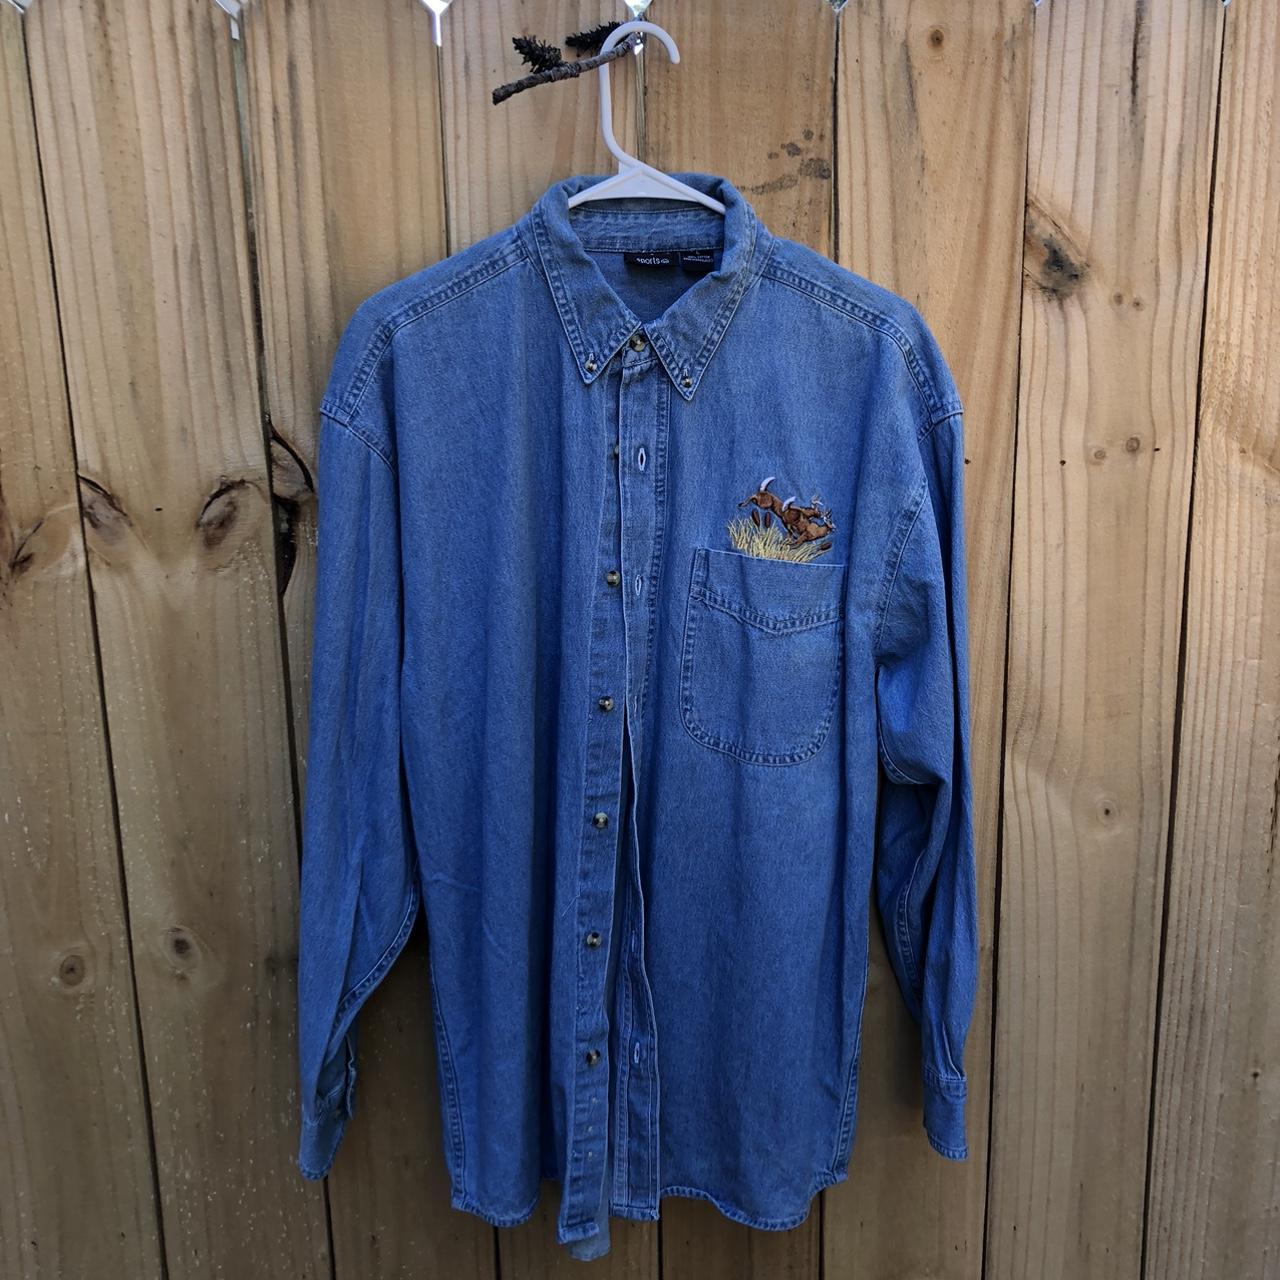 Reclaimed Vintage Men's Blue and Brown Shirt